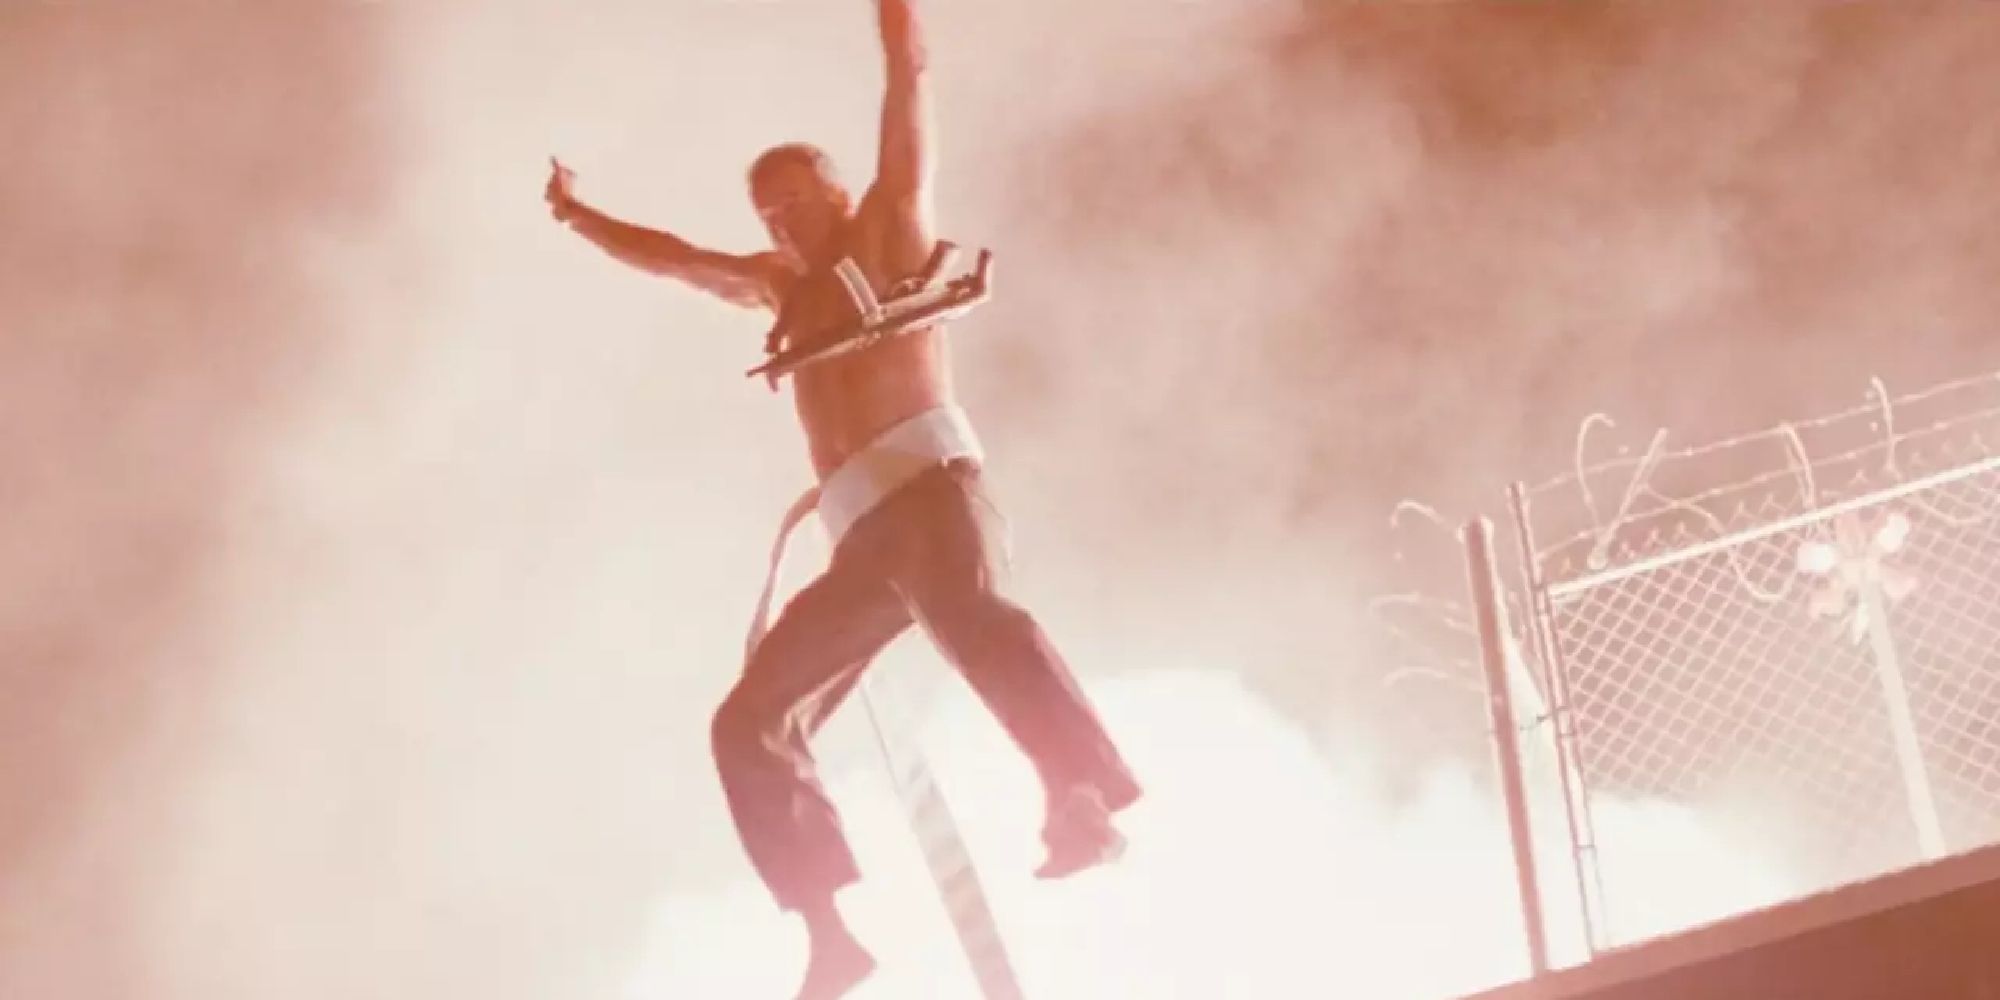 Bruce Willis as John McClane jumping from a roof in Die Hard